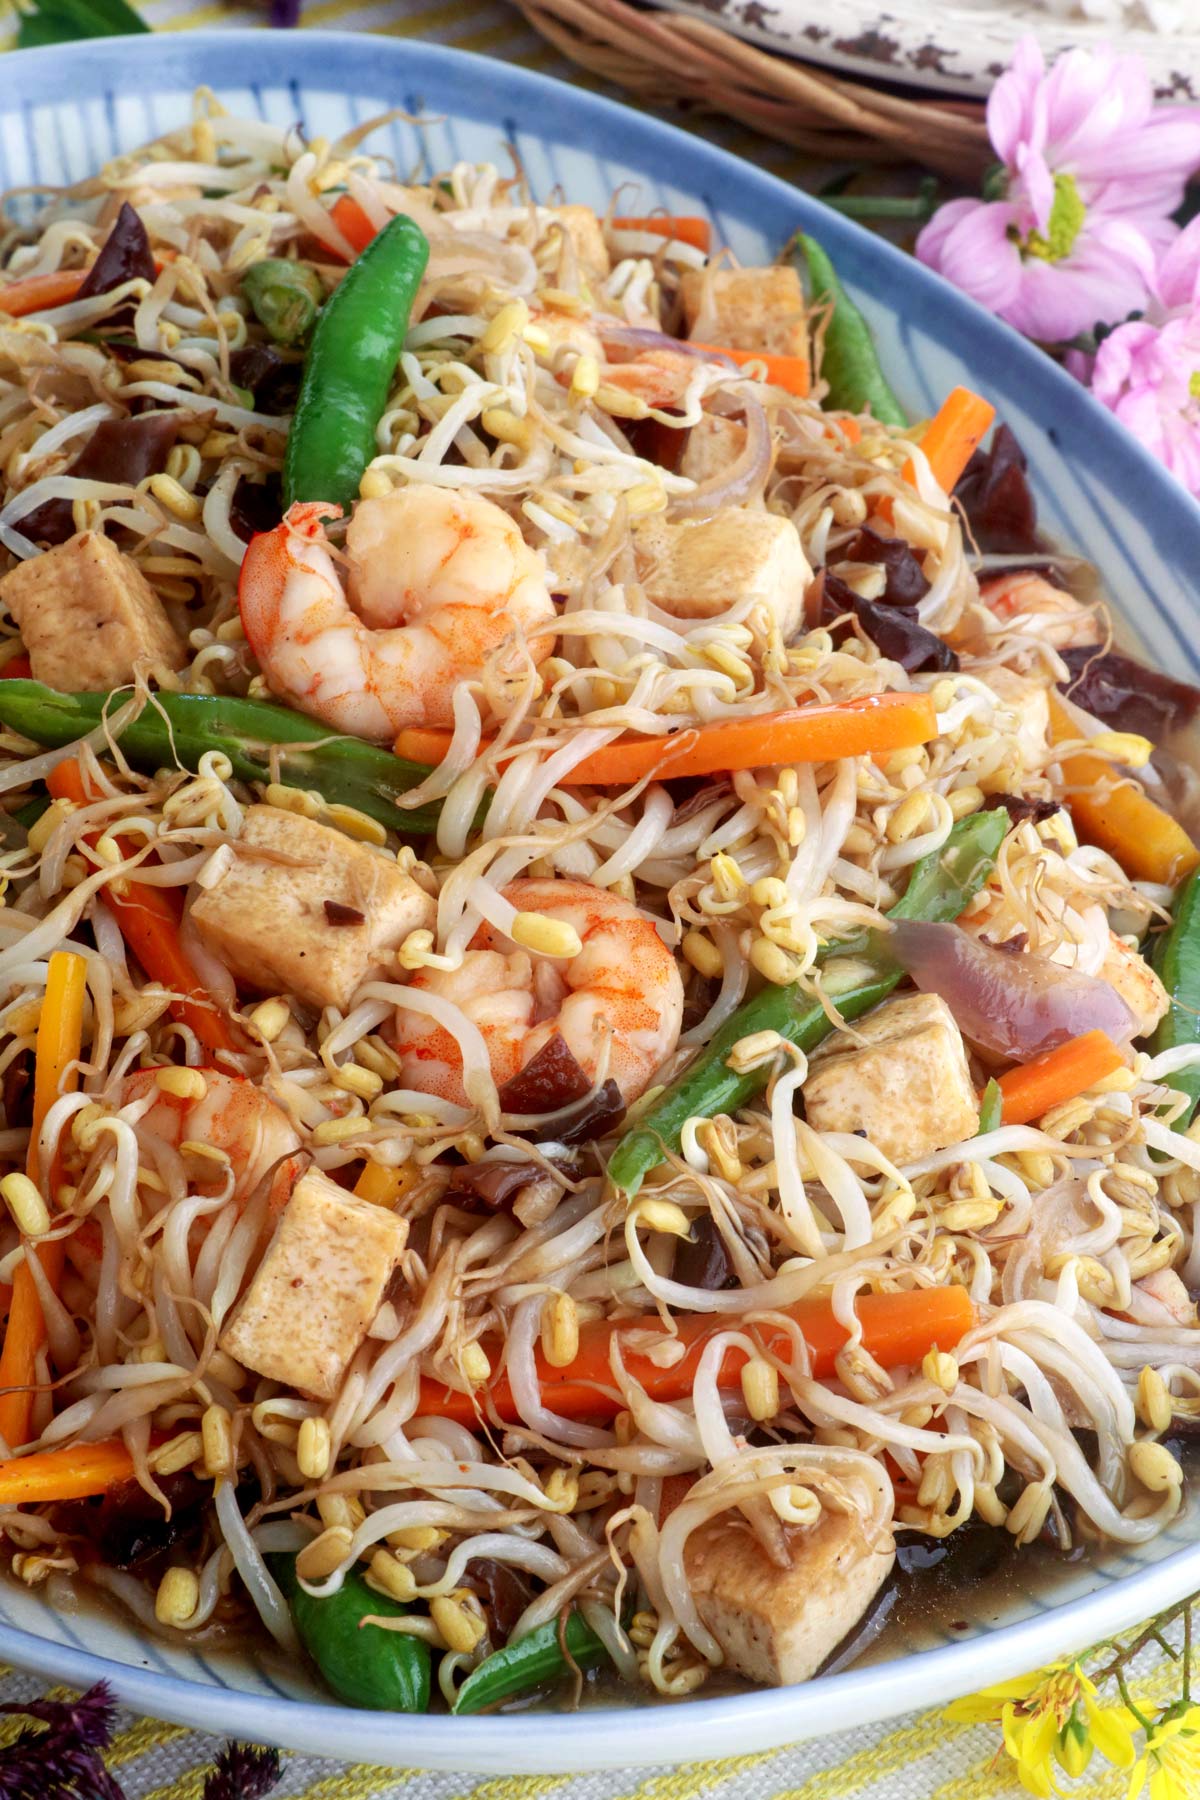 Sautéed mung bean sprouts with tofu, shrimp, carrots, and green beans.